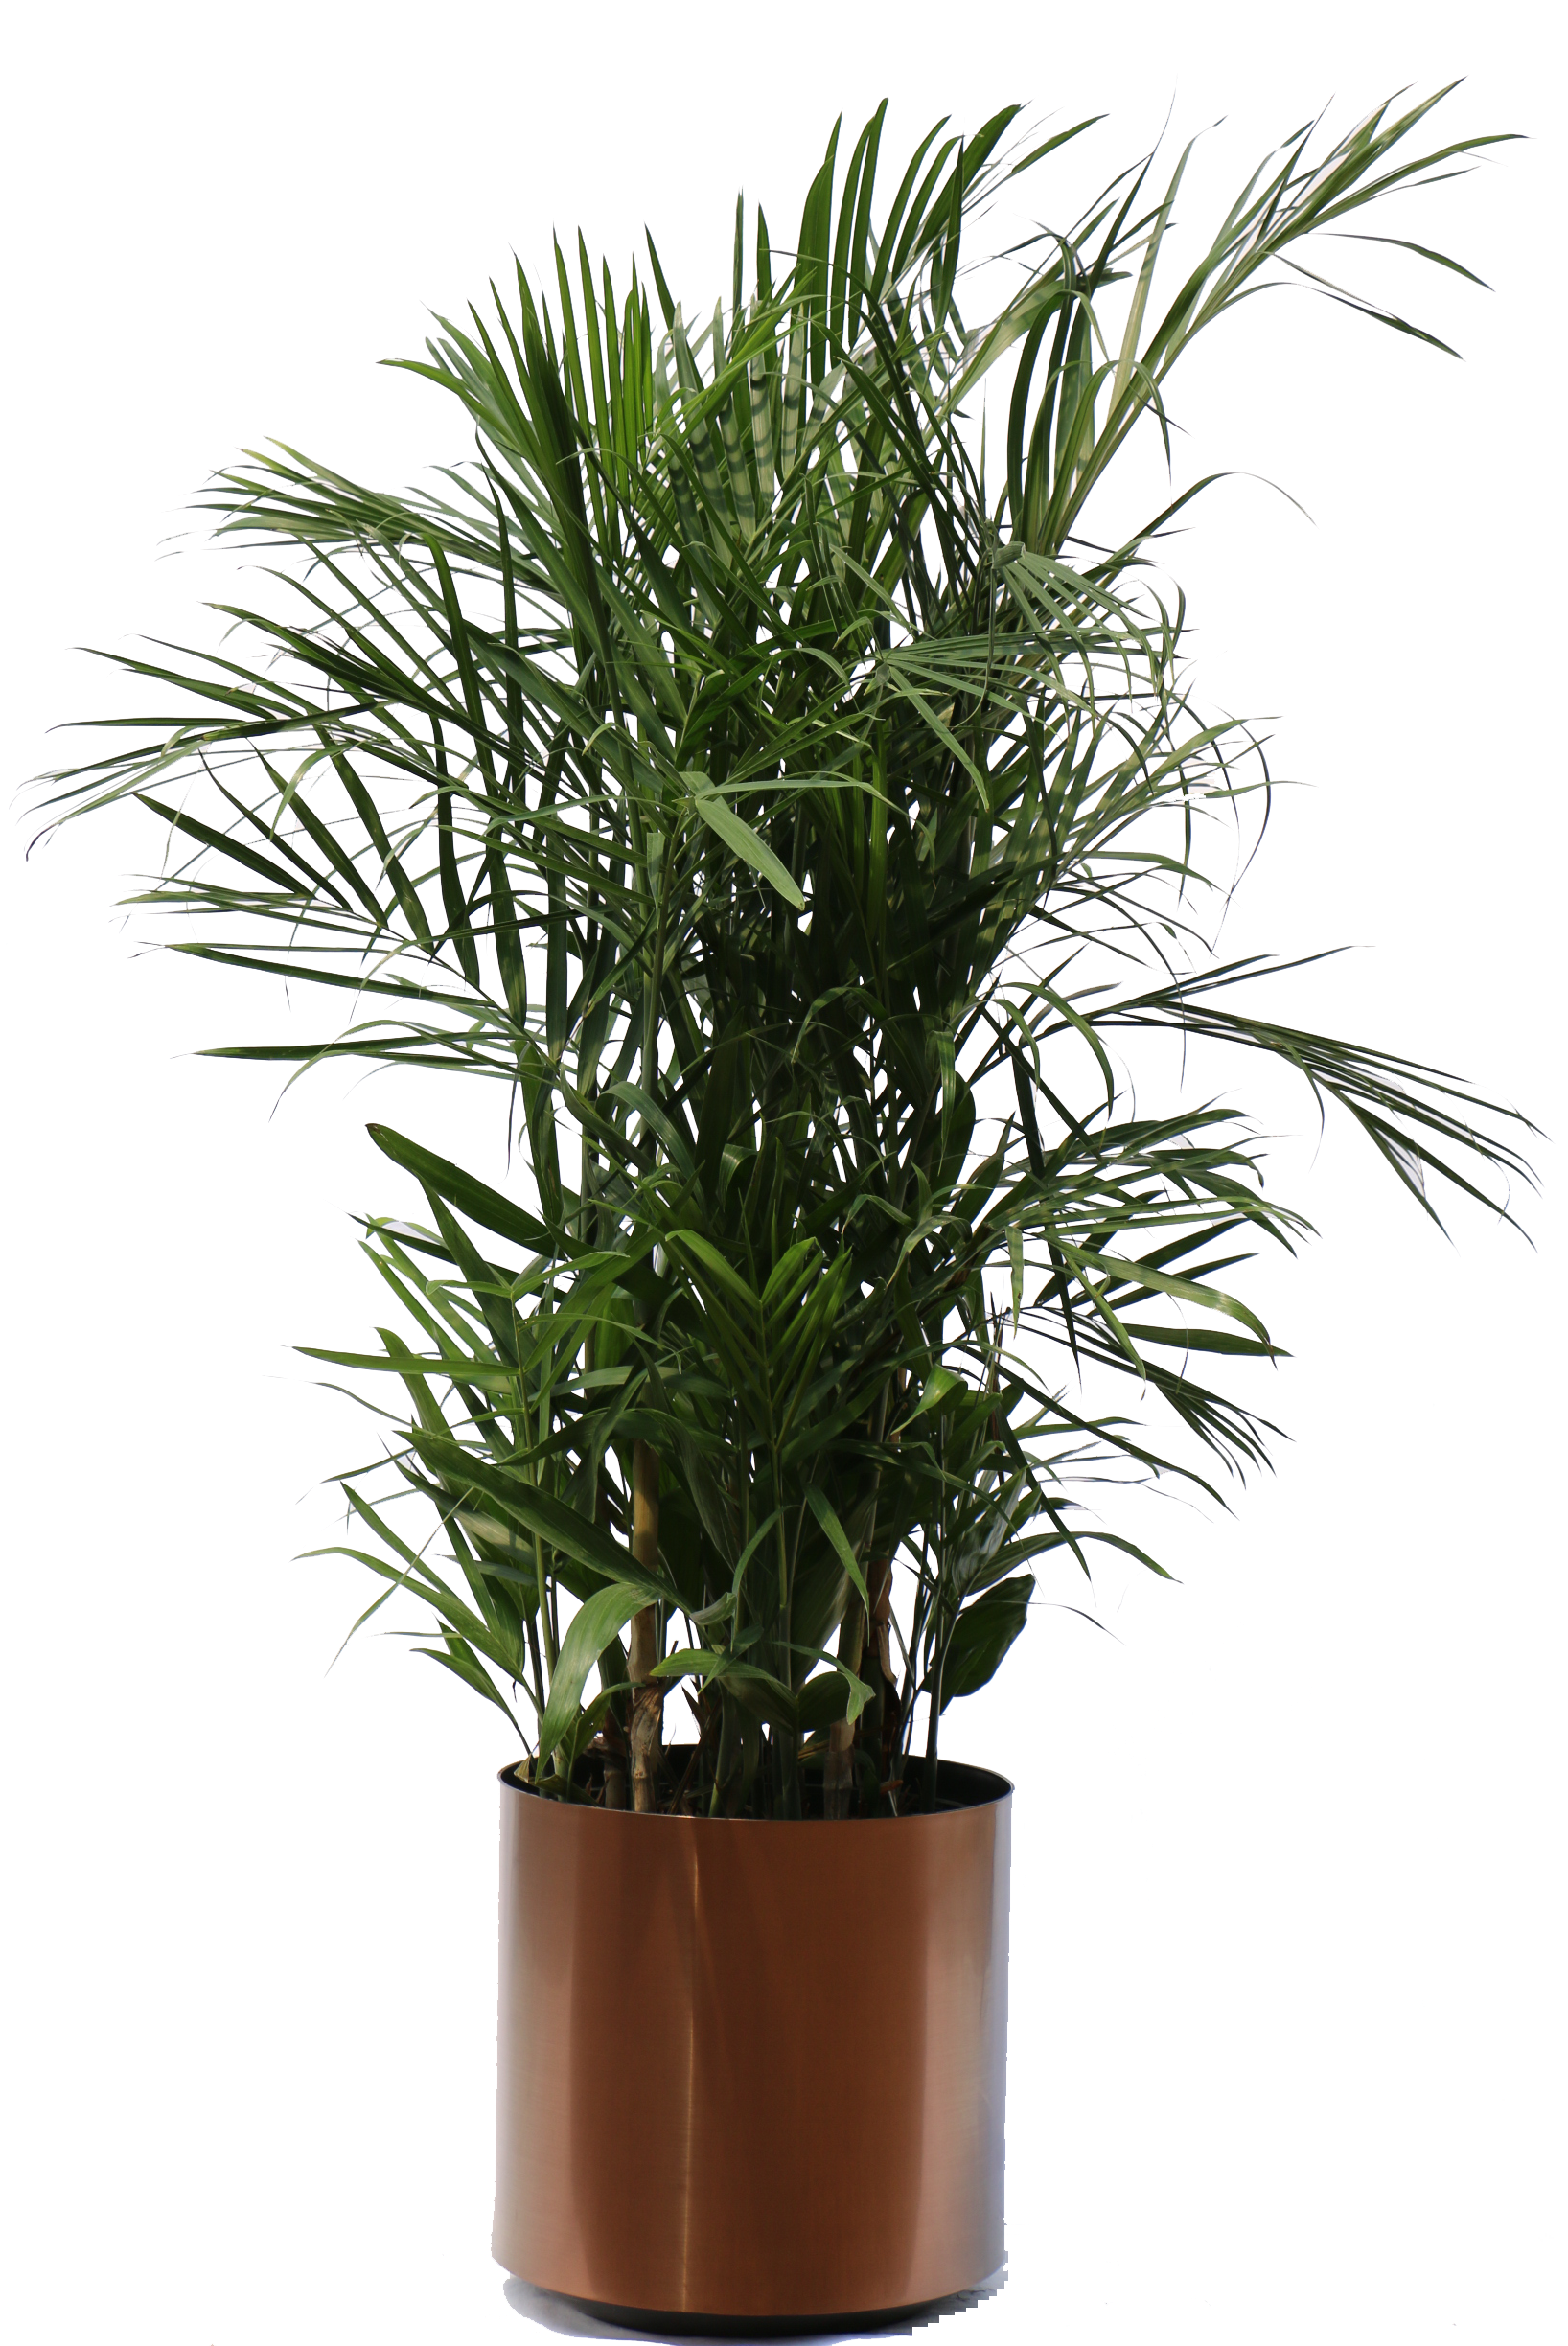 Plant Free Png Images Potted Plant Cartoon Plant Images Free Transparent Png Logos